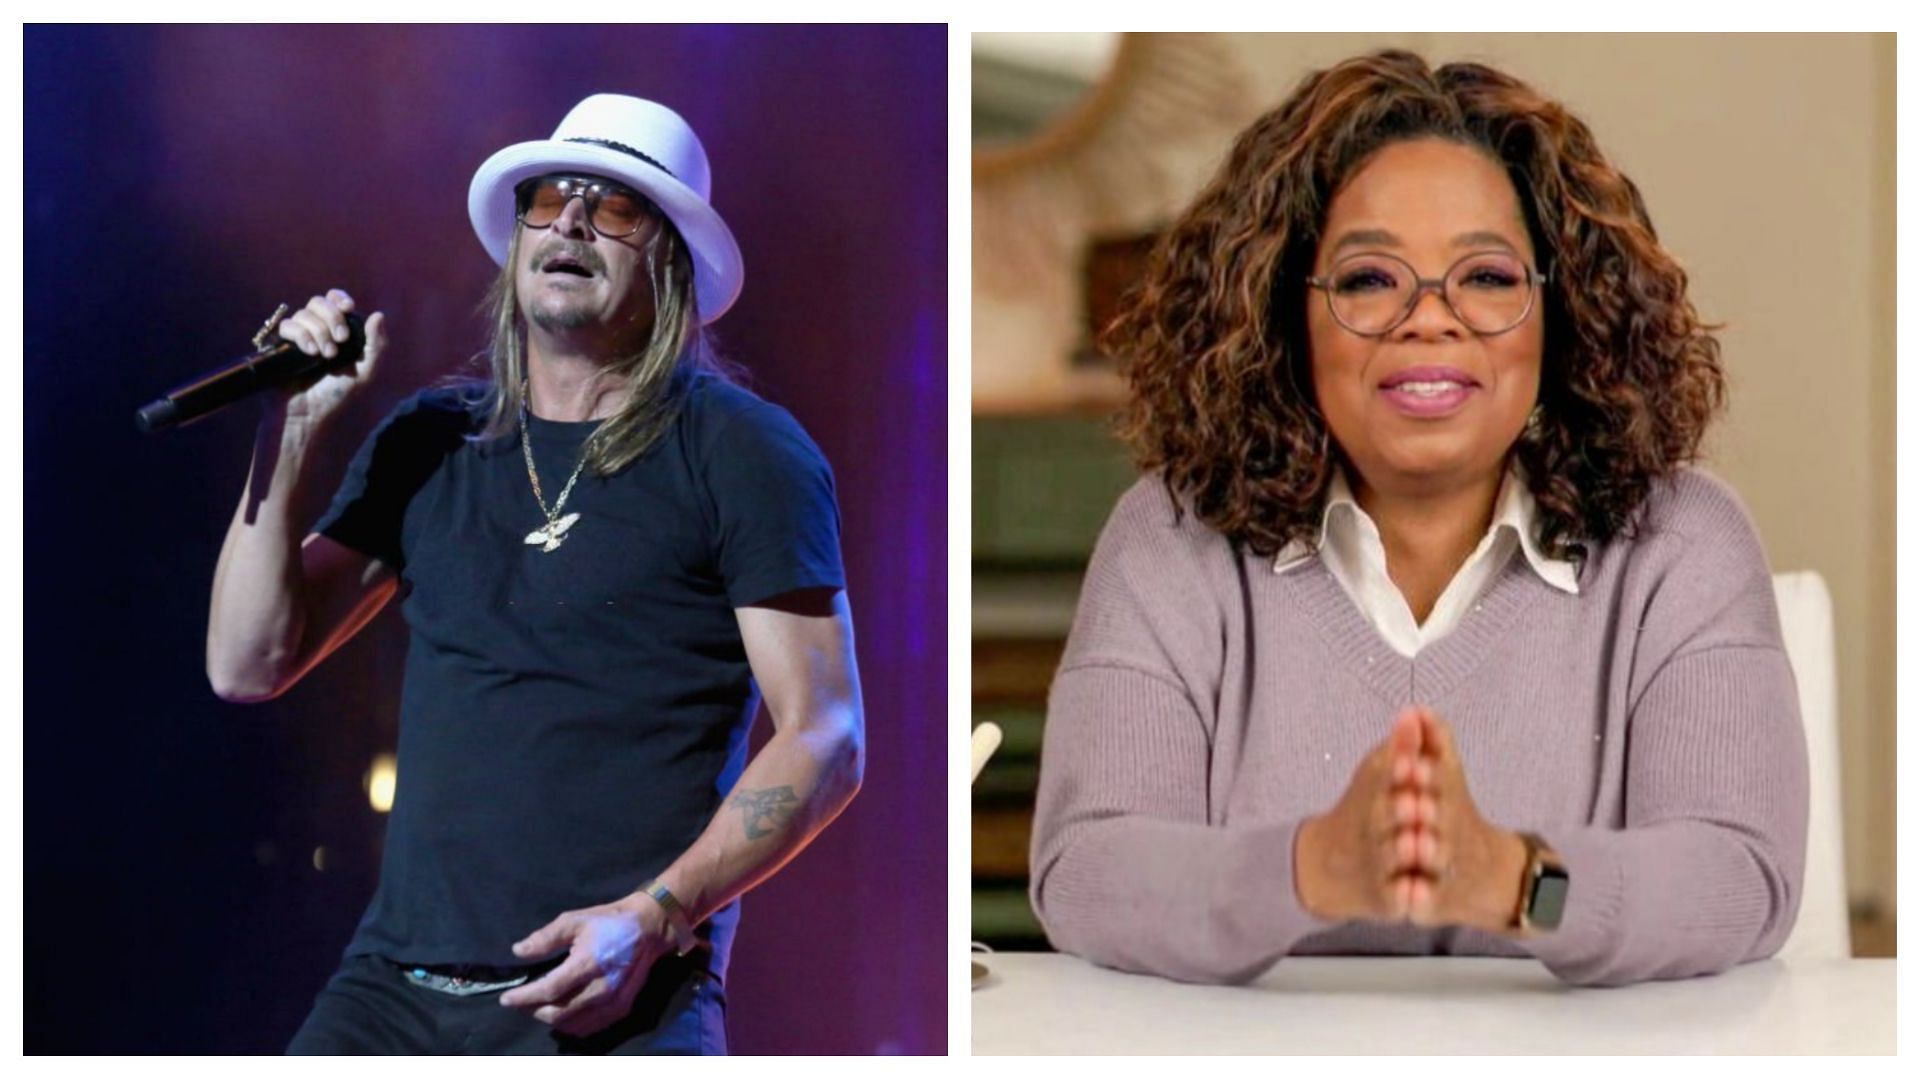 Kid Rock mentioned in his rant that he did not like Oprah Winfrey (Images via Gary Miller and Global Citizen/Getty Images)